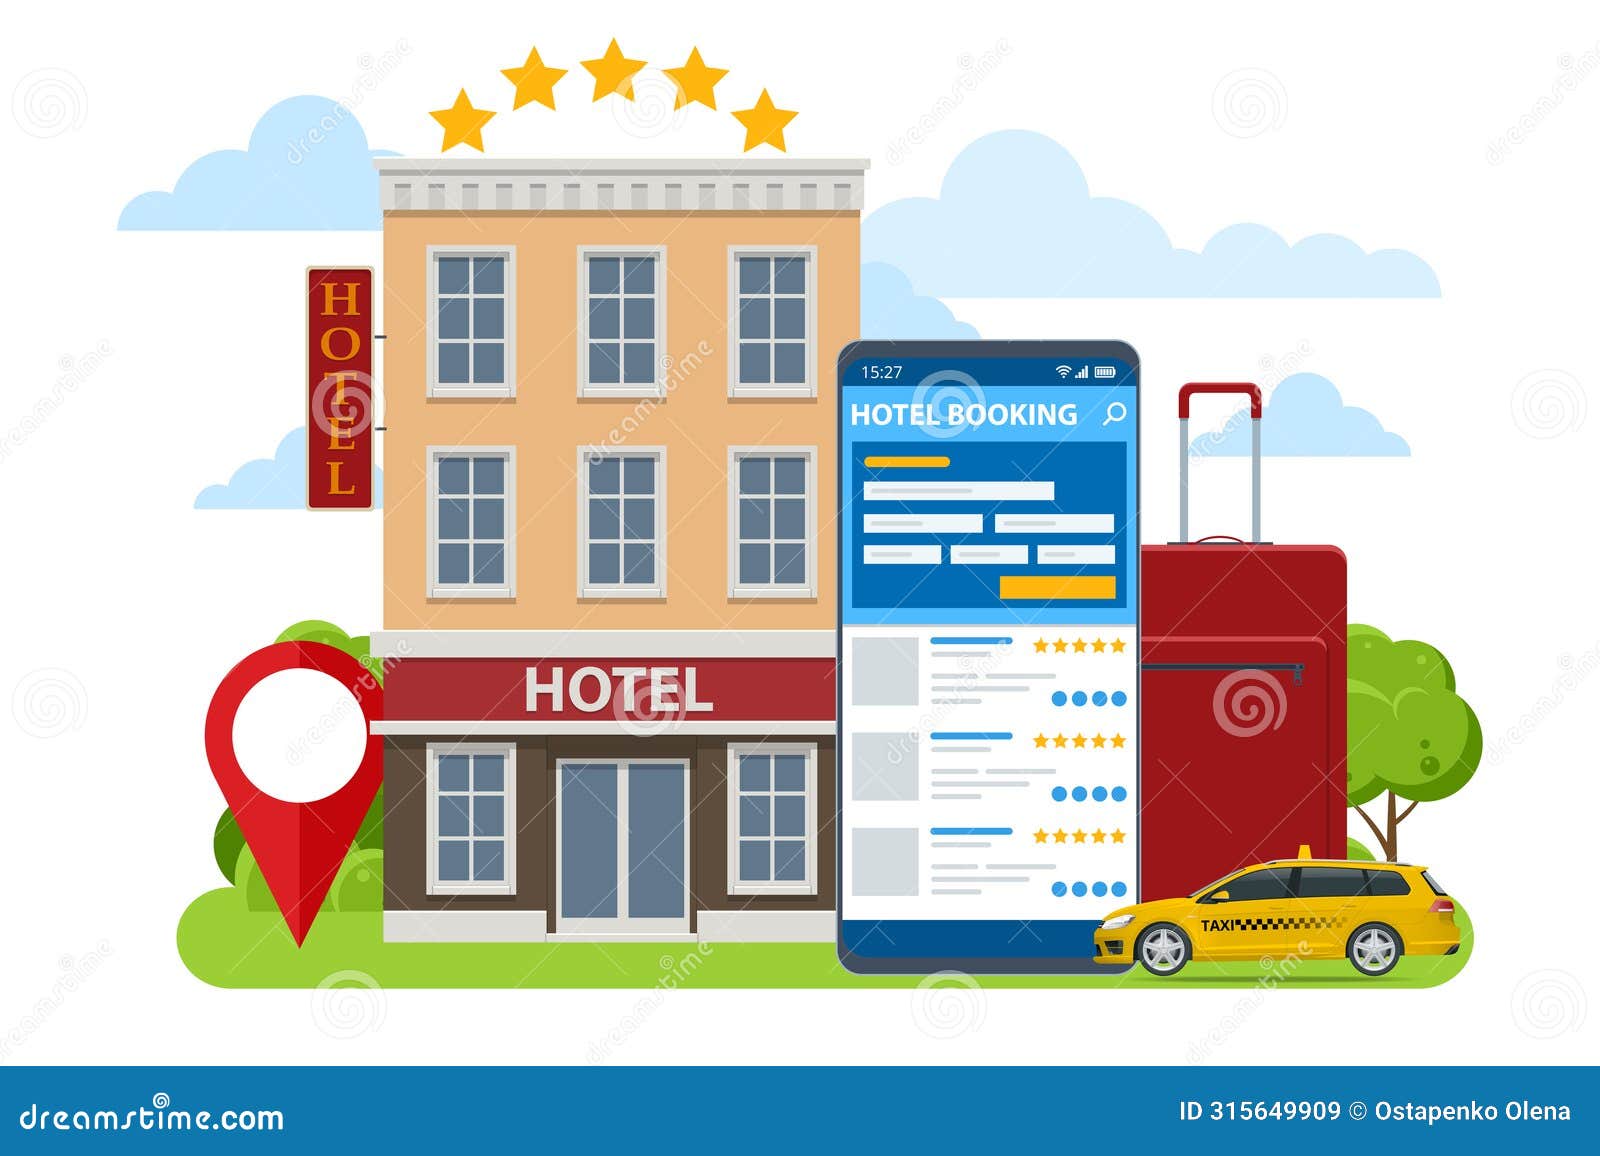 isometric online hotel booking concept. buying ticket with smartphone. people booking hotel and search reservation for